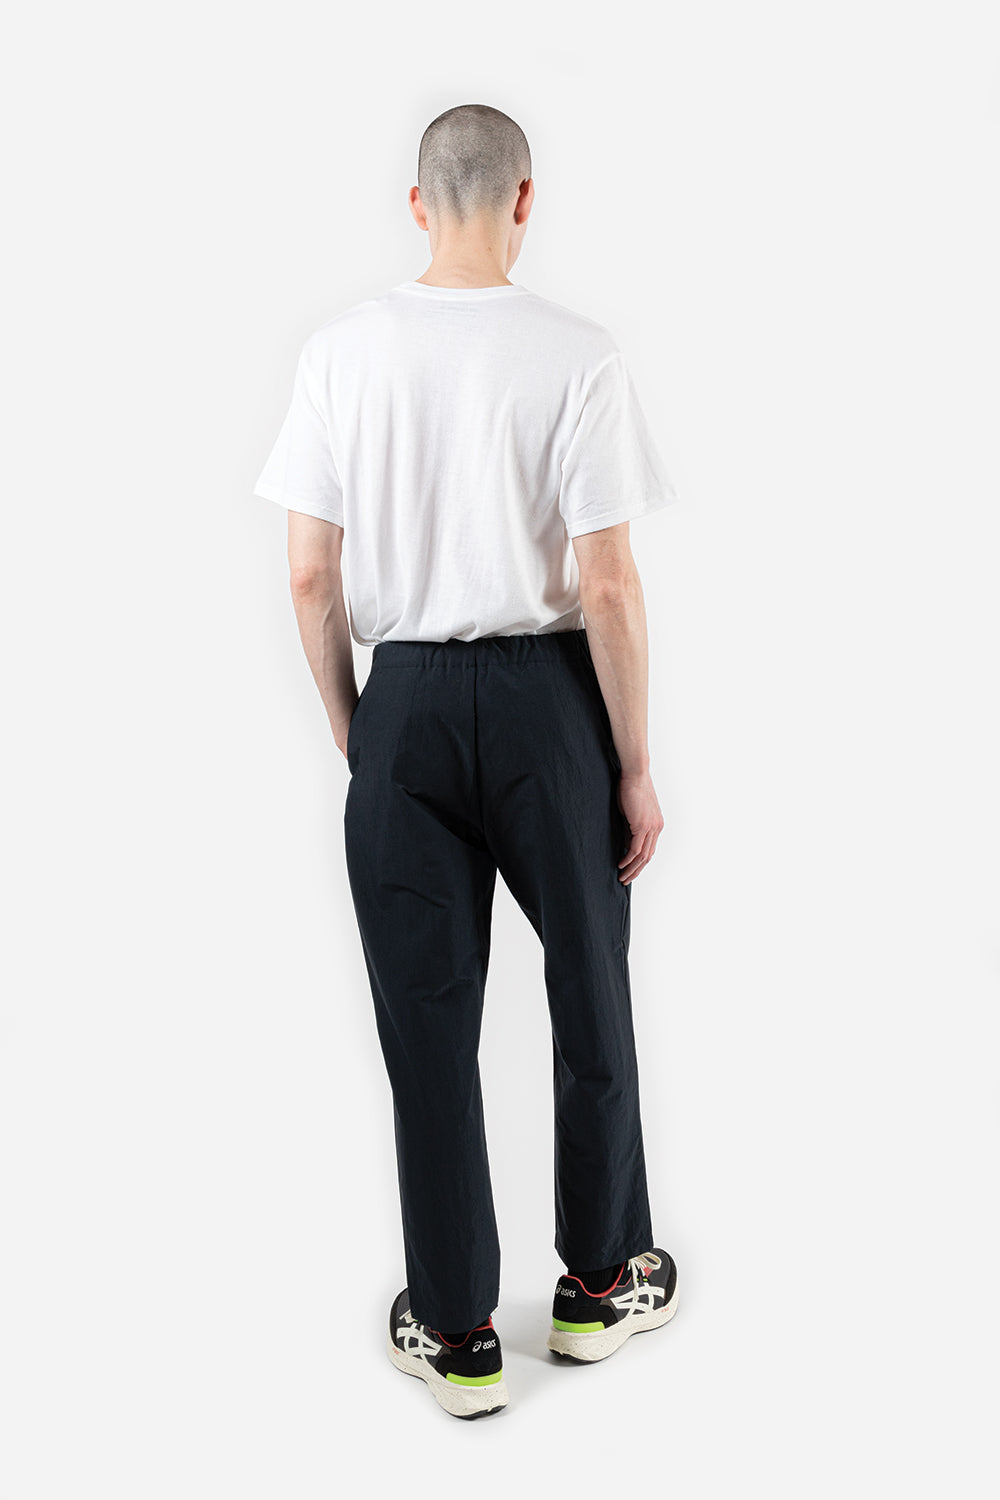 Goldwin One Tuck Tapered Stretch Twill Pants in Dark Navy - Wallace M